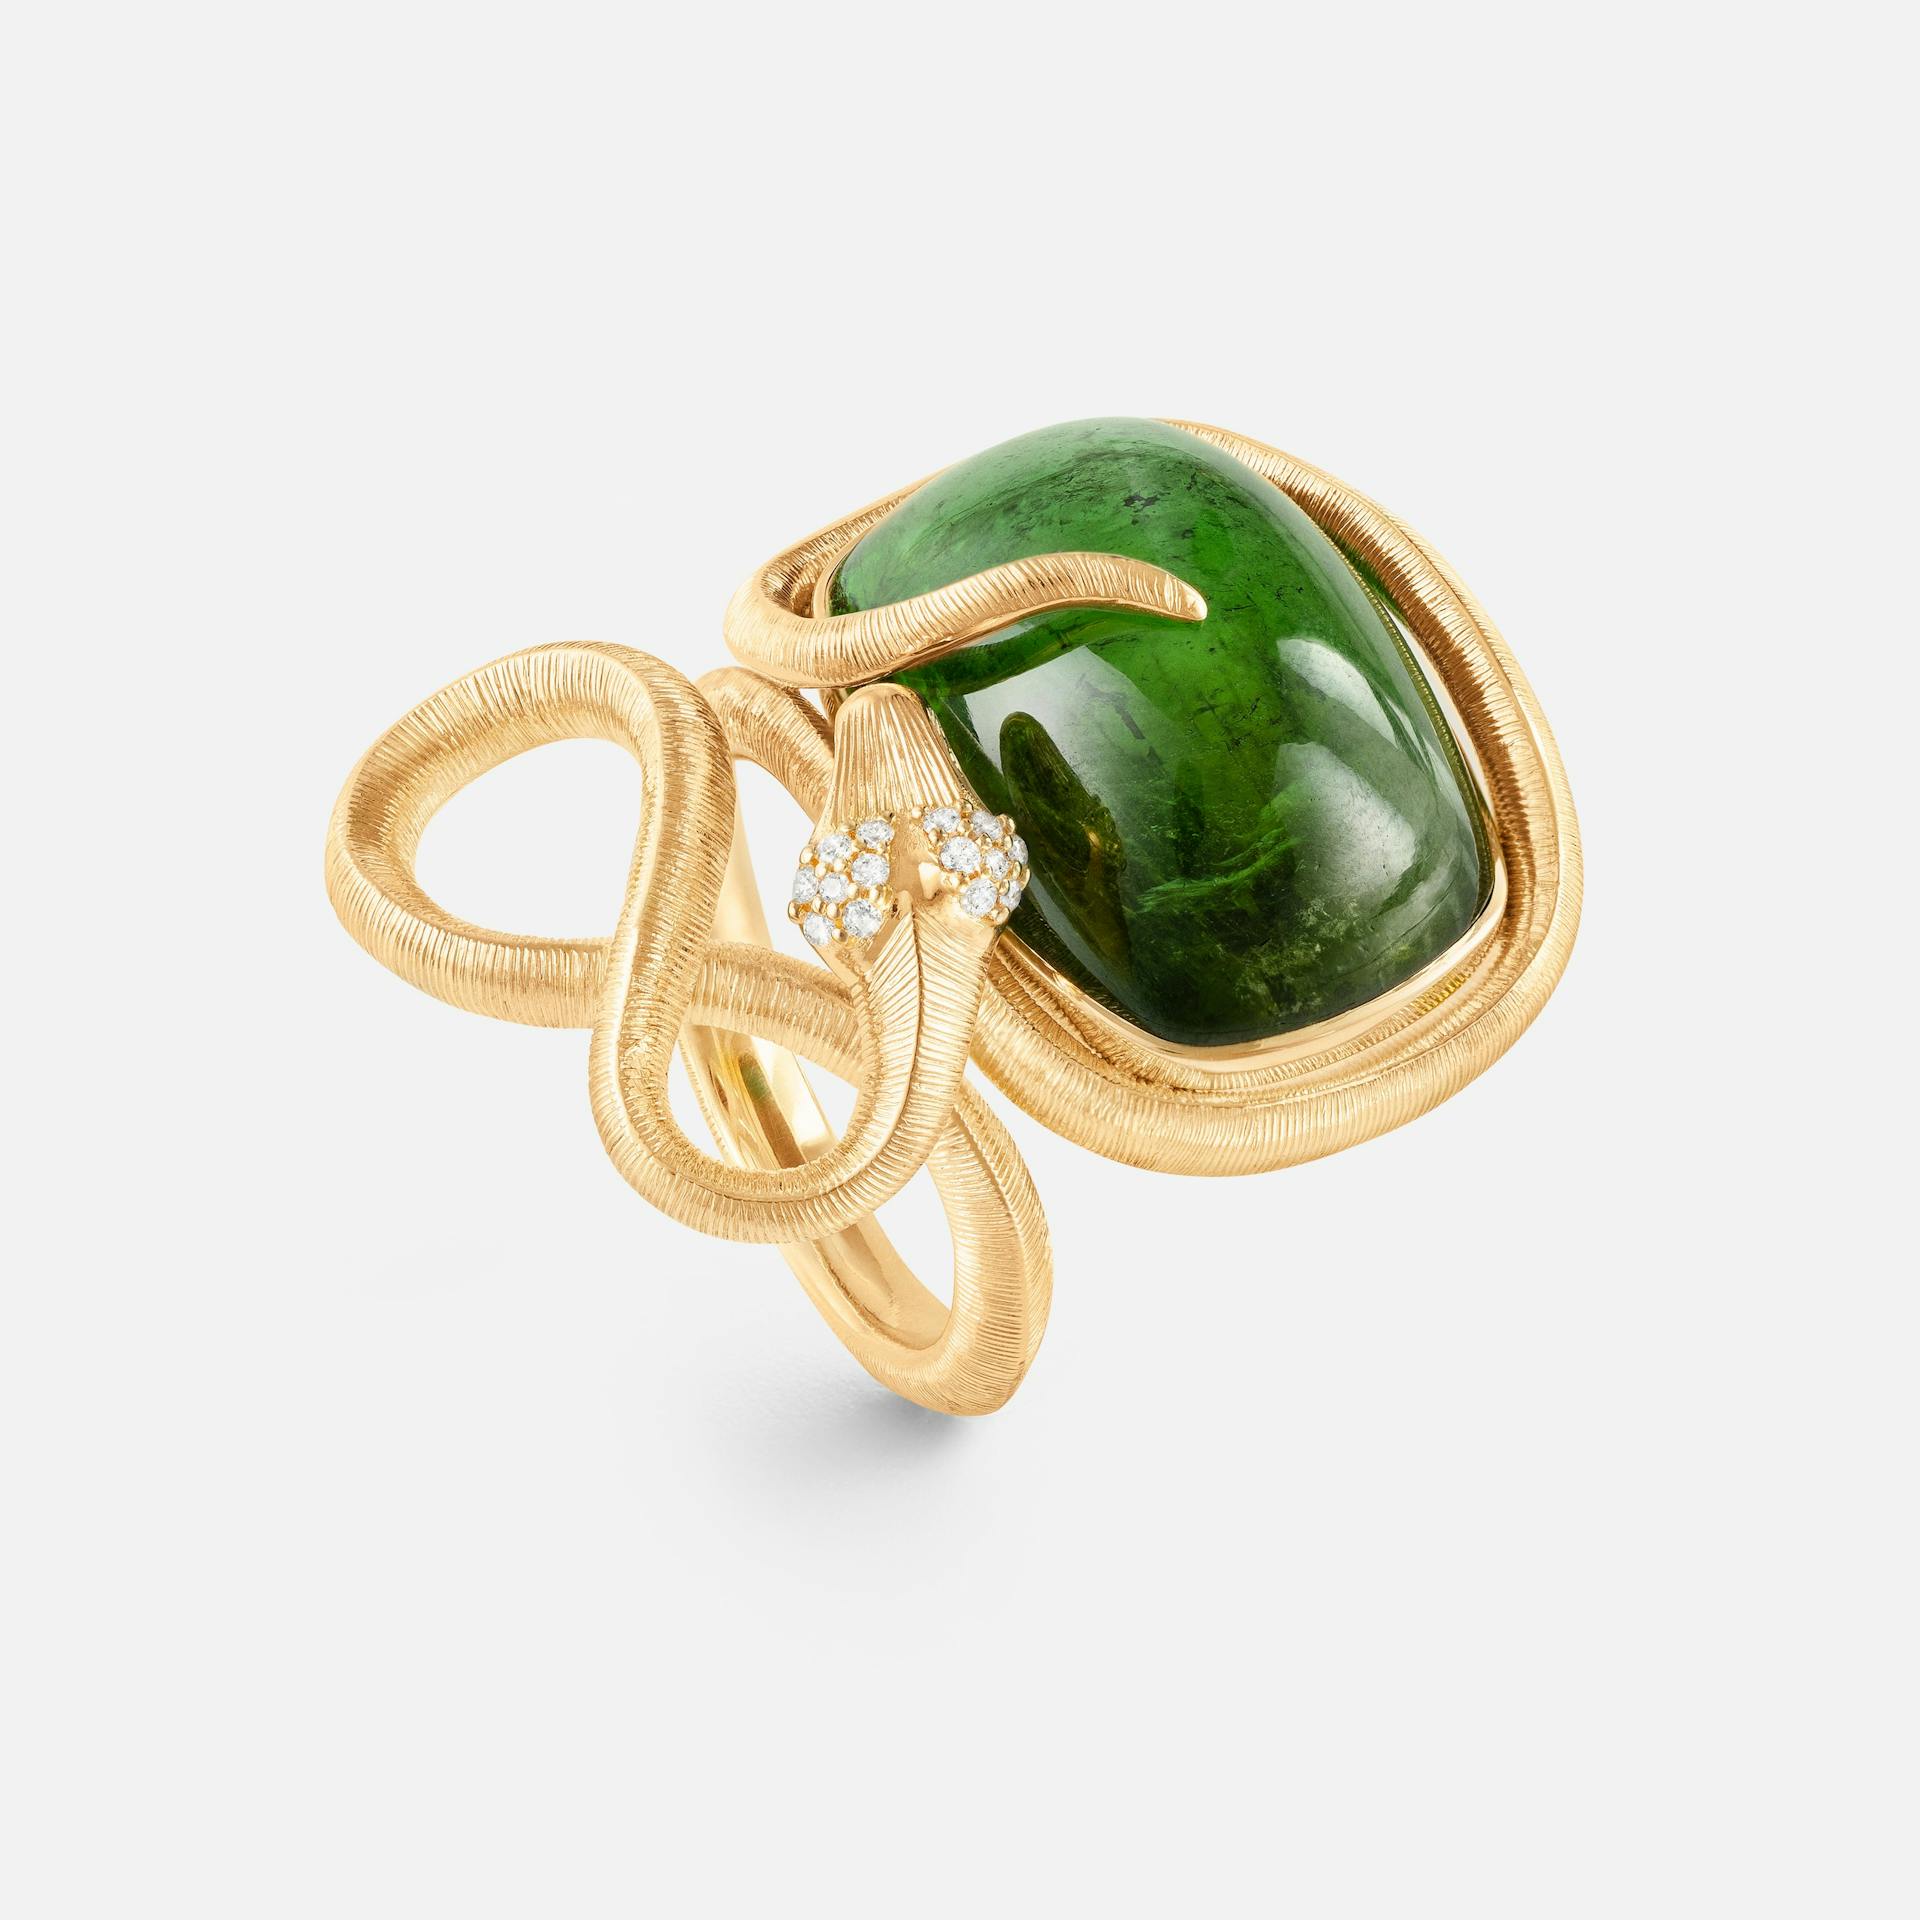 Snakes Ring in Yellow Gold with Green Tourmaline and Diamonds